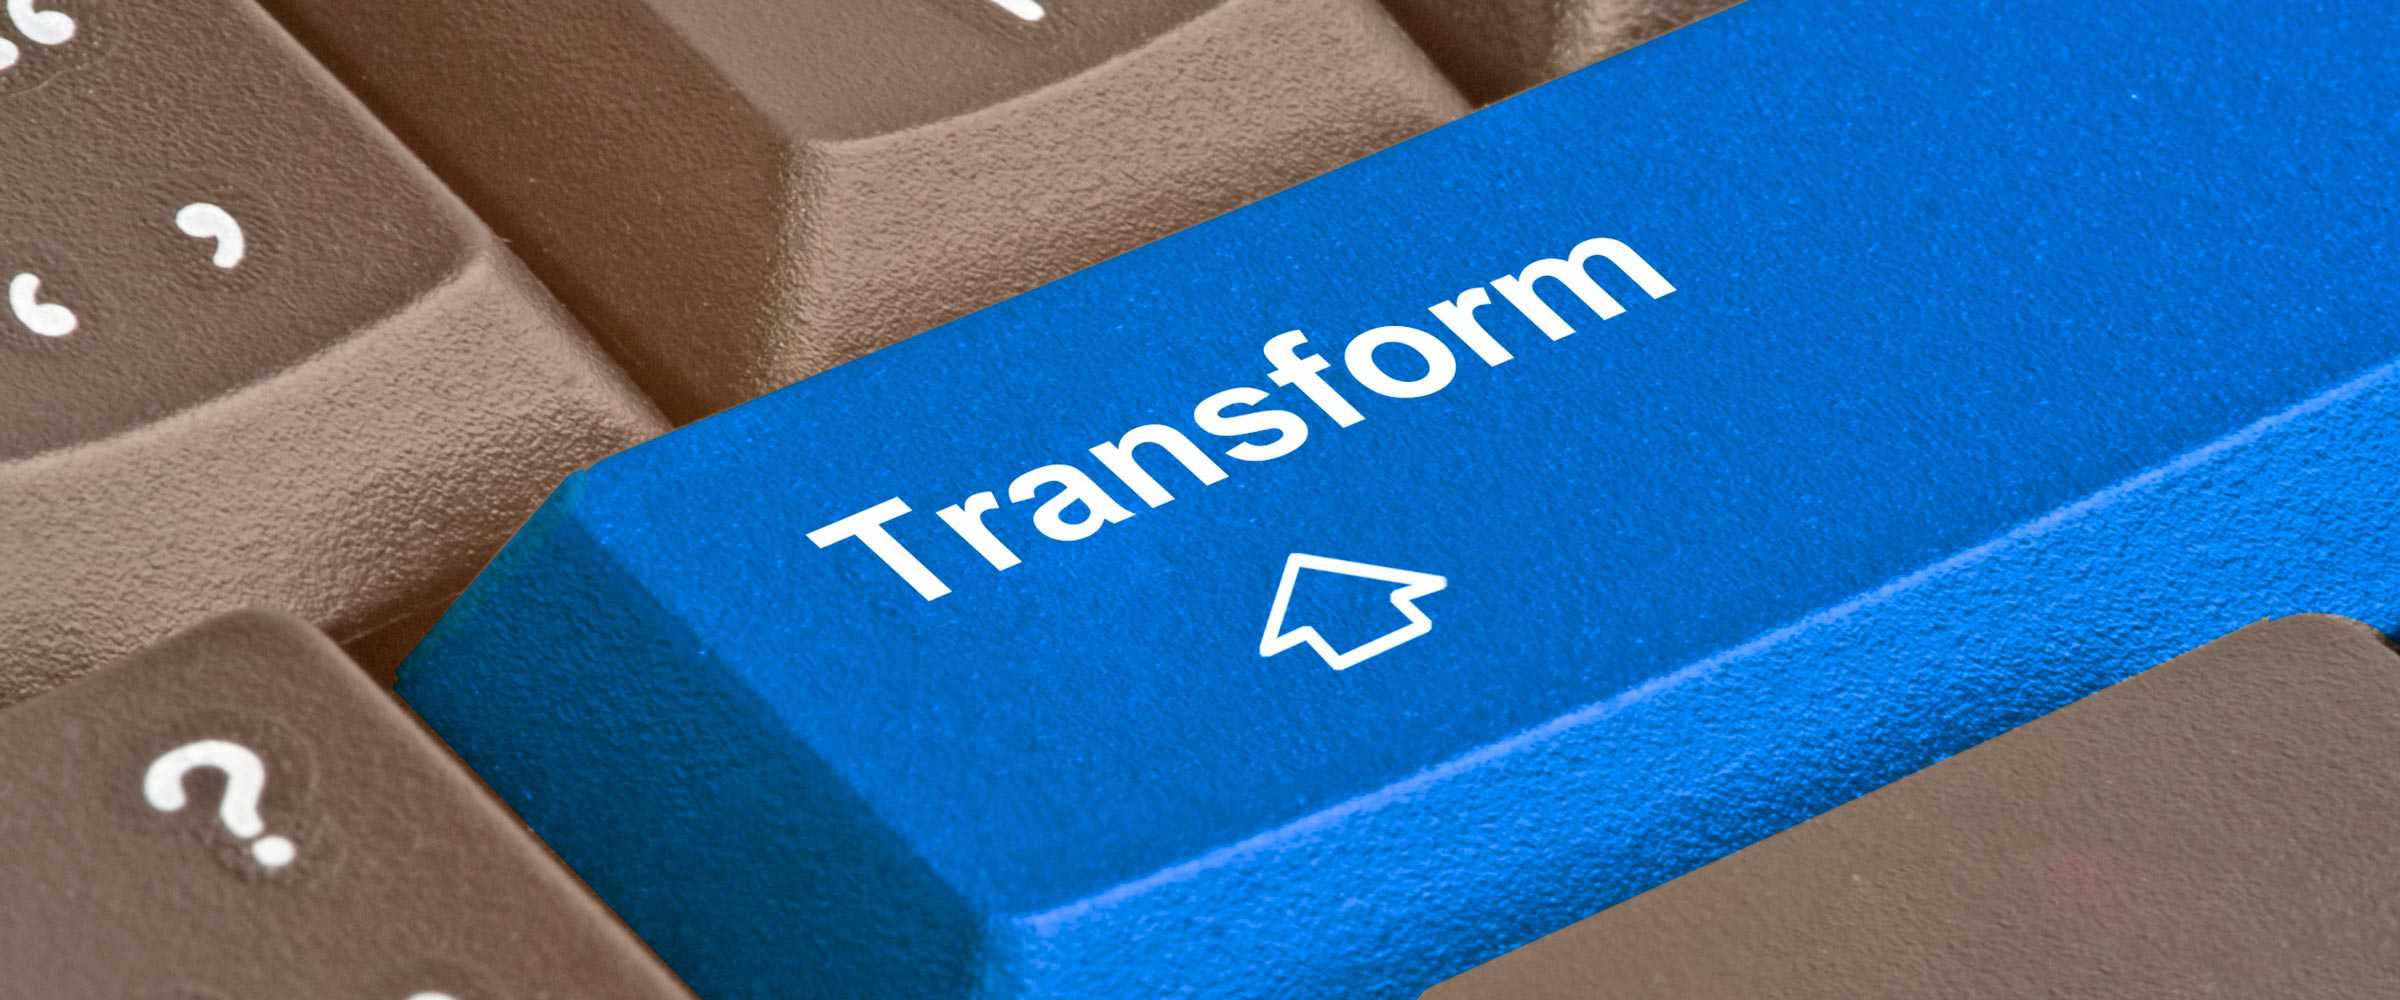 Key benefits in pursuing Finance transformation projects